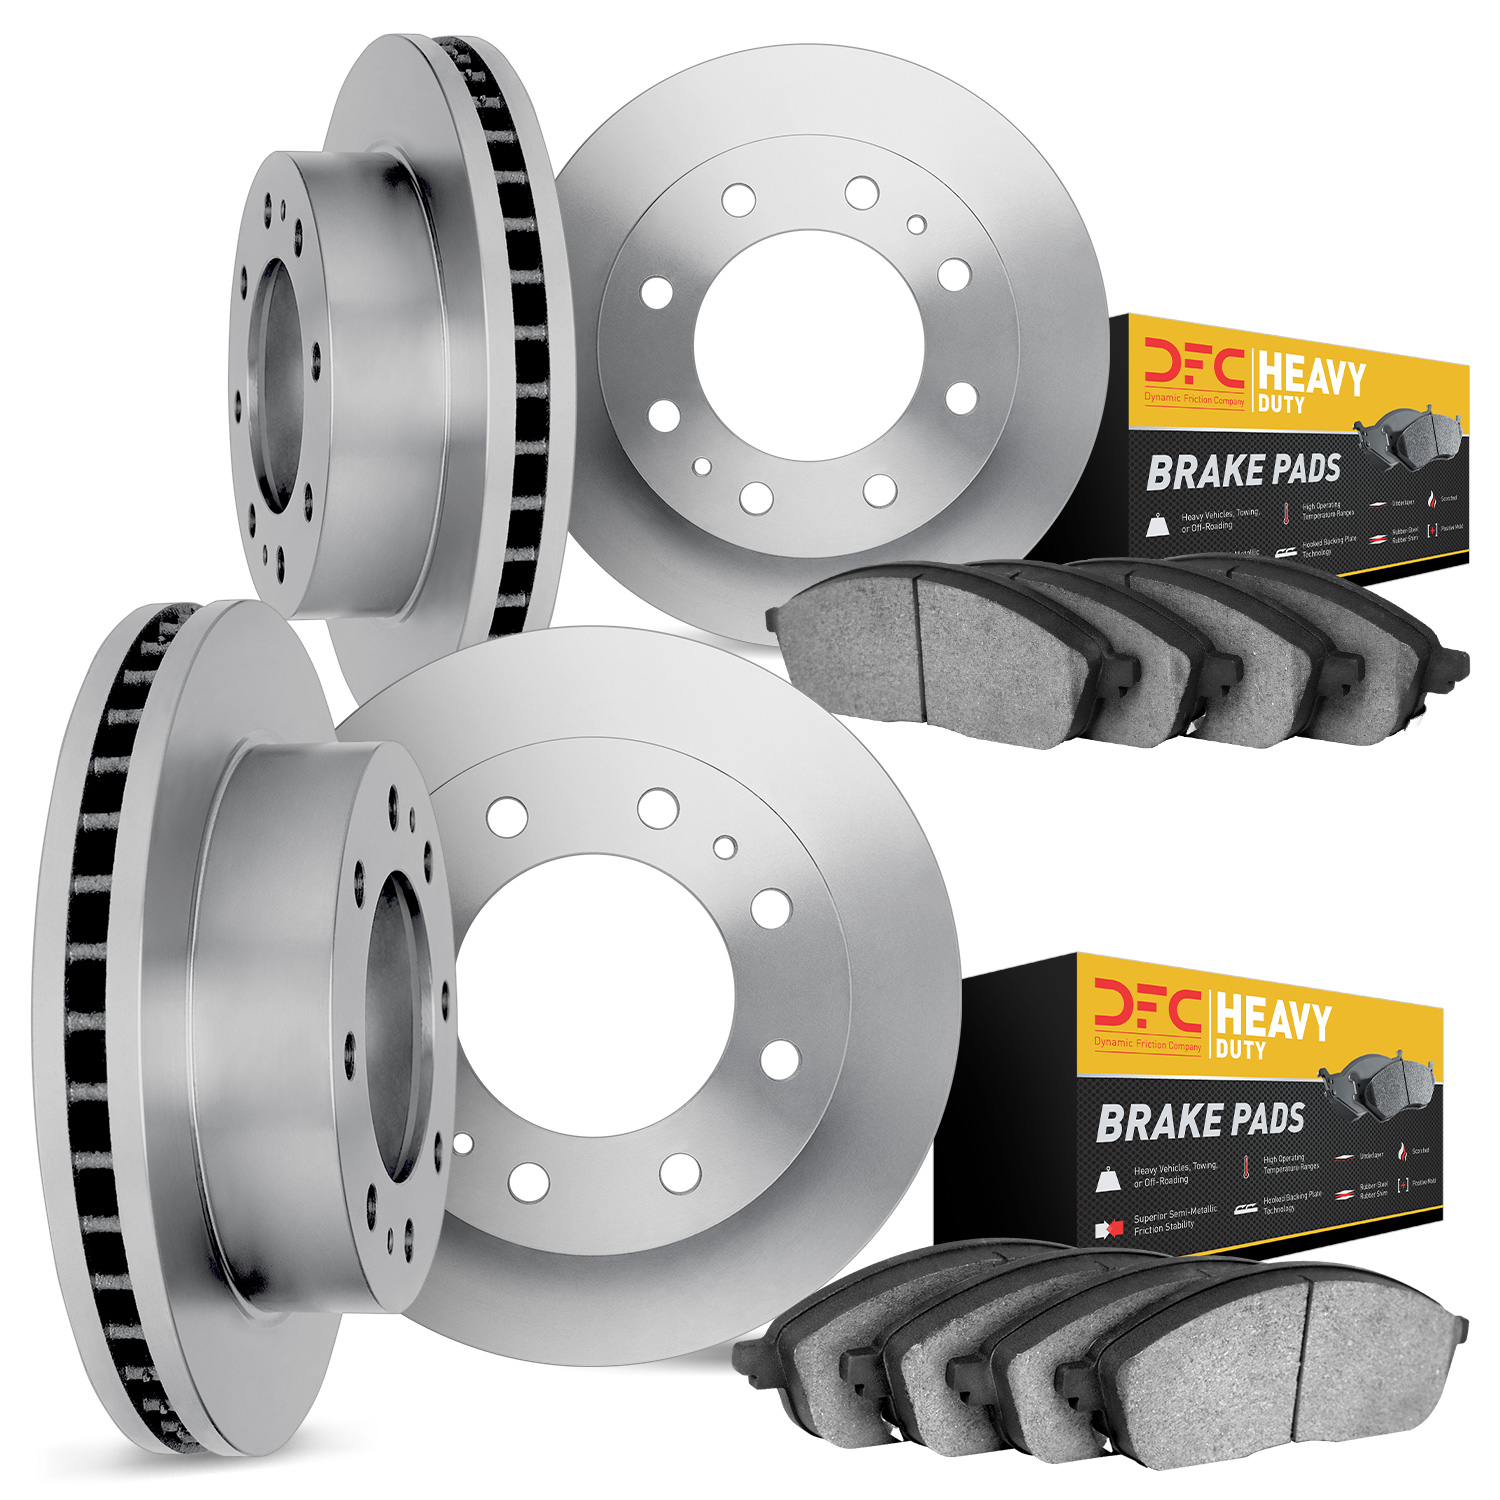 6204-99315 Brake Rotors w/Heavy-Duty Brake Pads Kit, Fits Select Ford/Lincoln/Mercury/Mazda, Position: Front and Rear